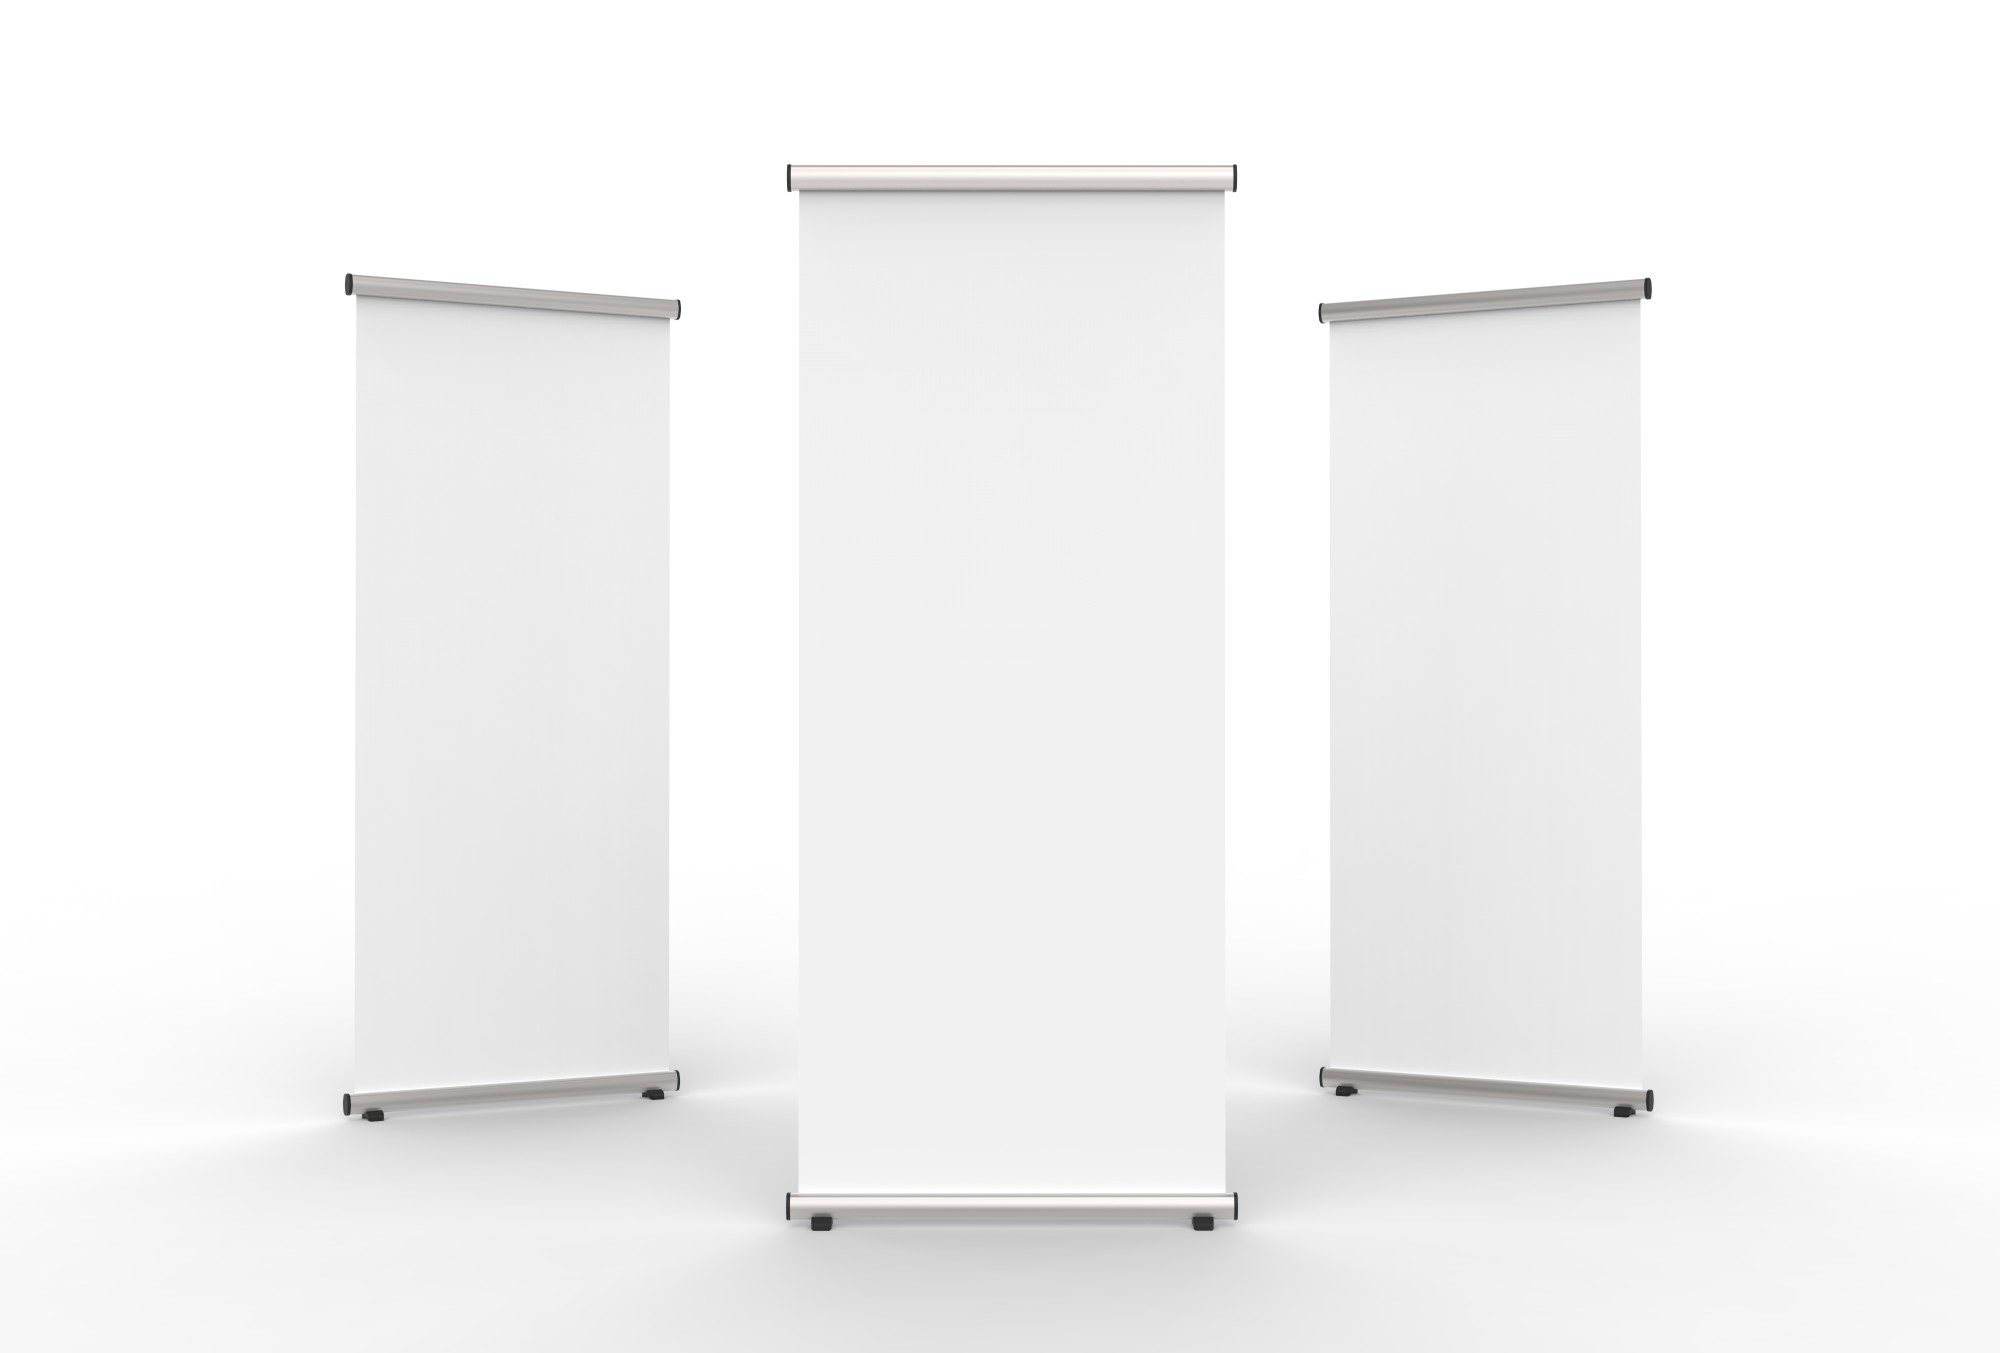 Blank roll up banner 3 display view template. 3d illustrating